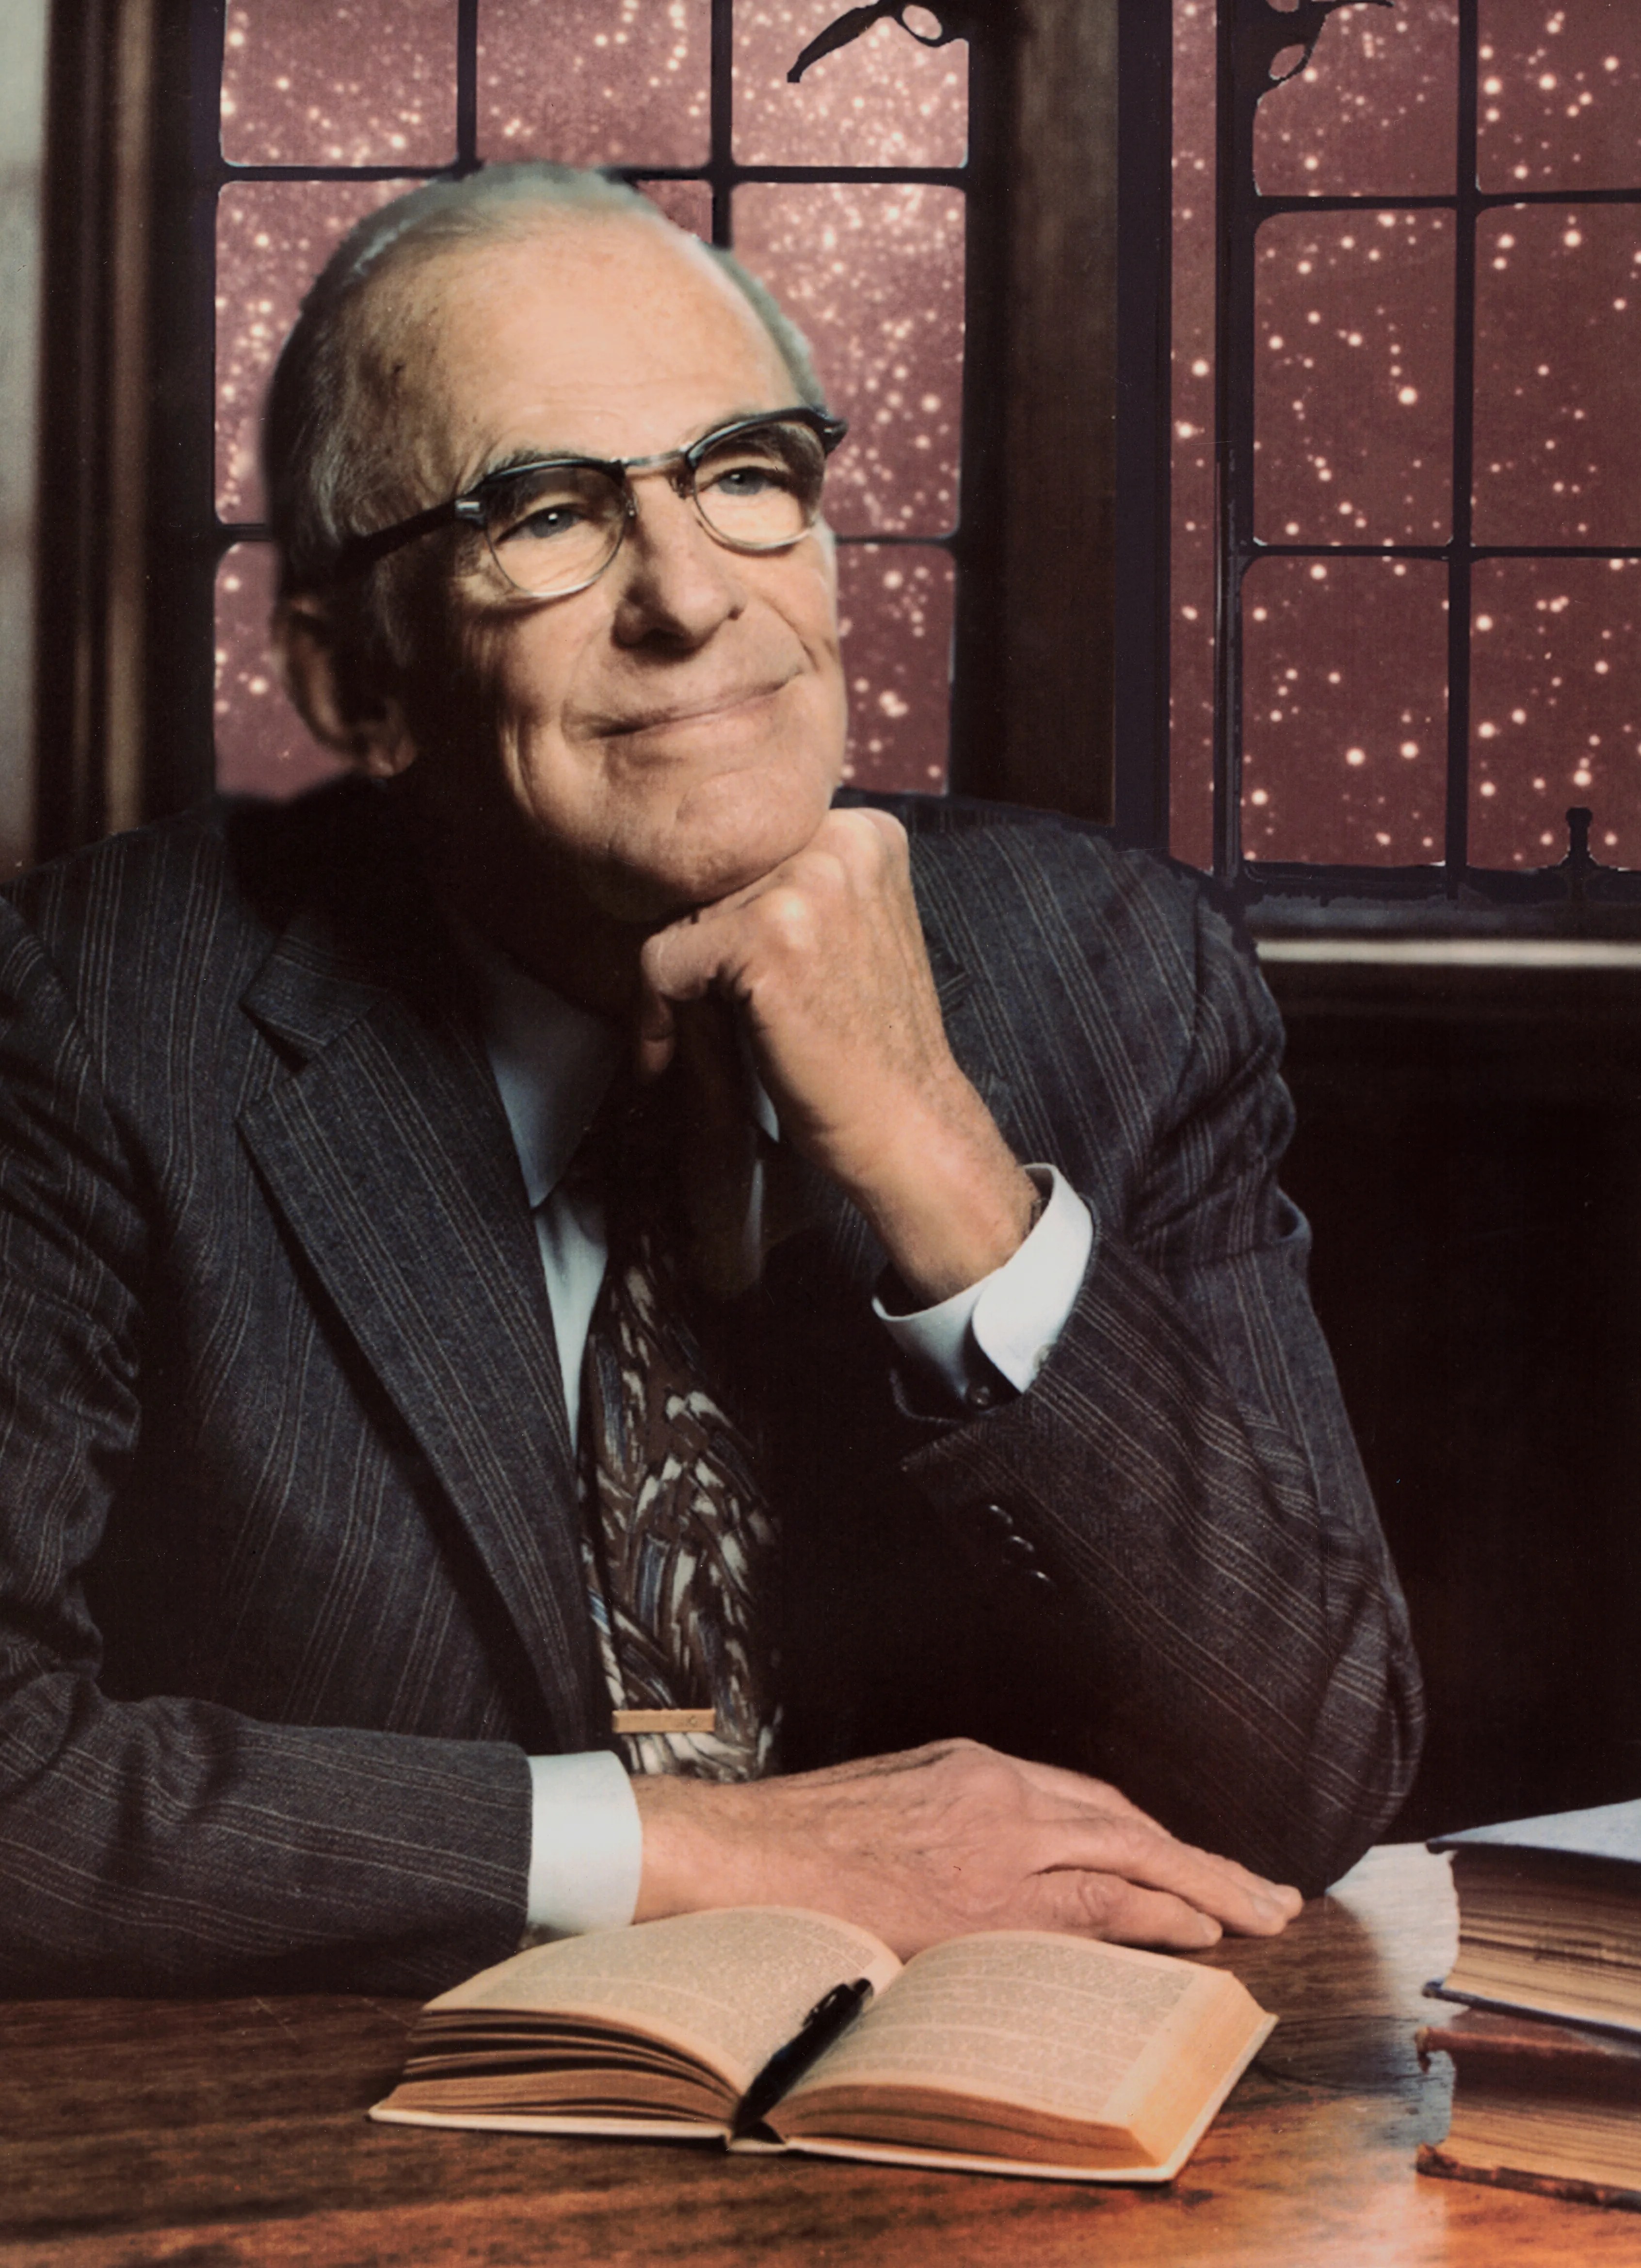 Lyman Spitzer sitting at a desk with his chin resting on his hand, the windows behind him showing a field of stars.